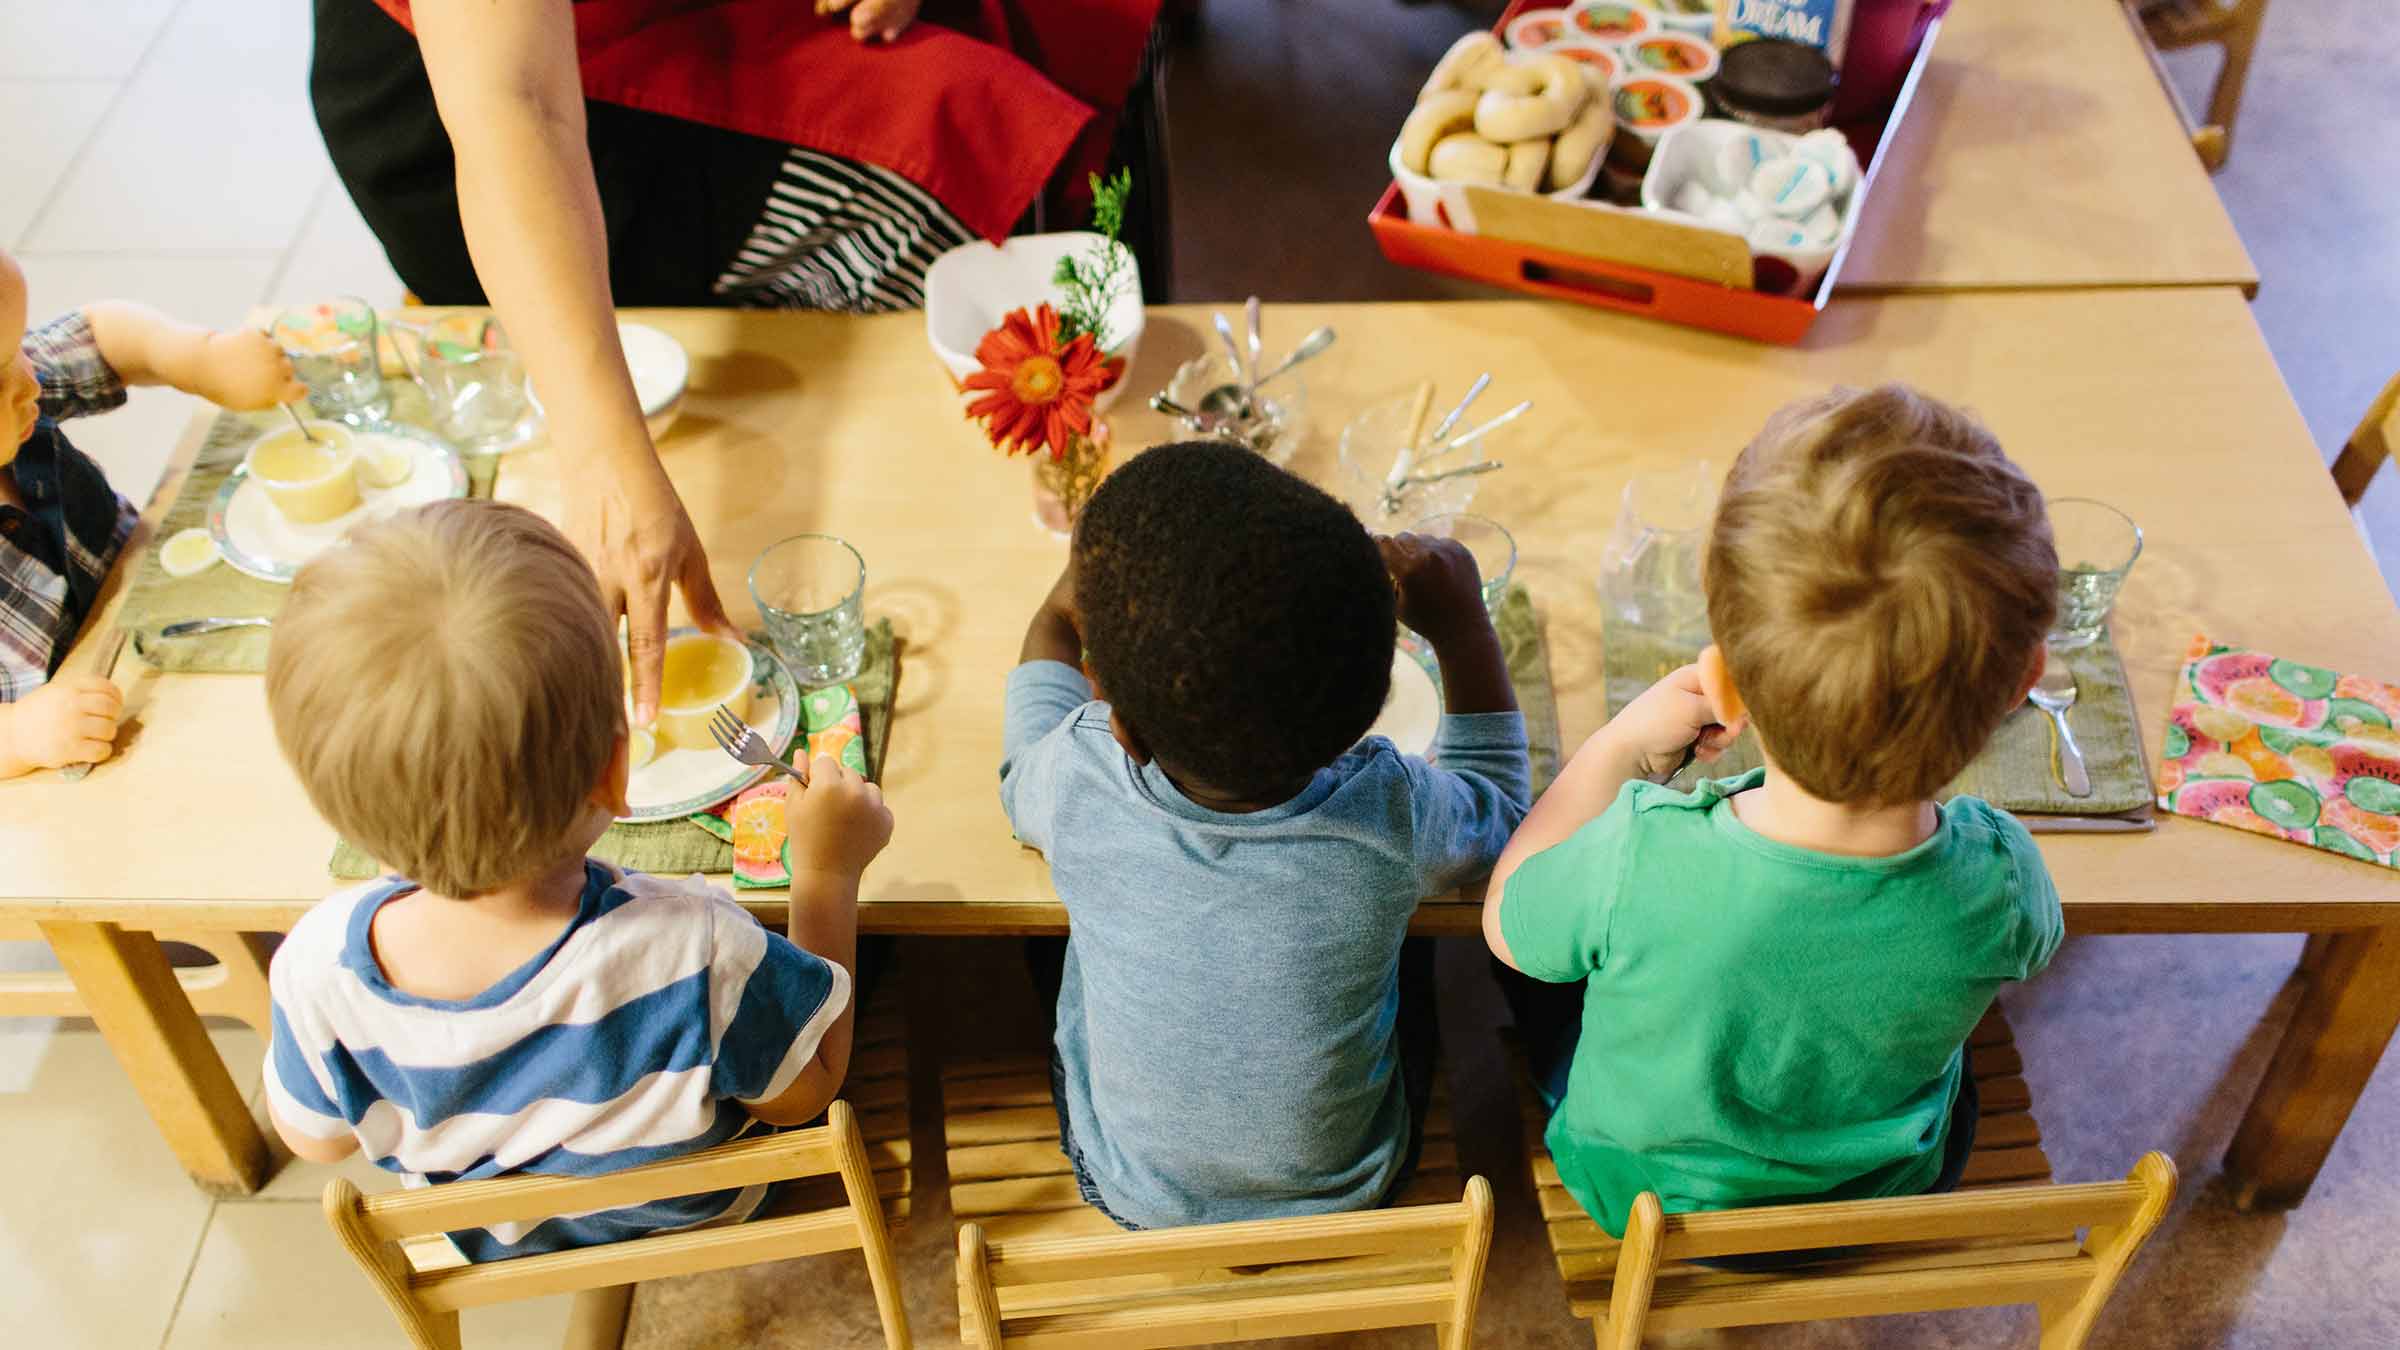 A group of preschoolers sit together at a table and are being served a snack